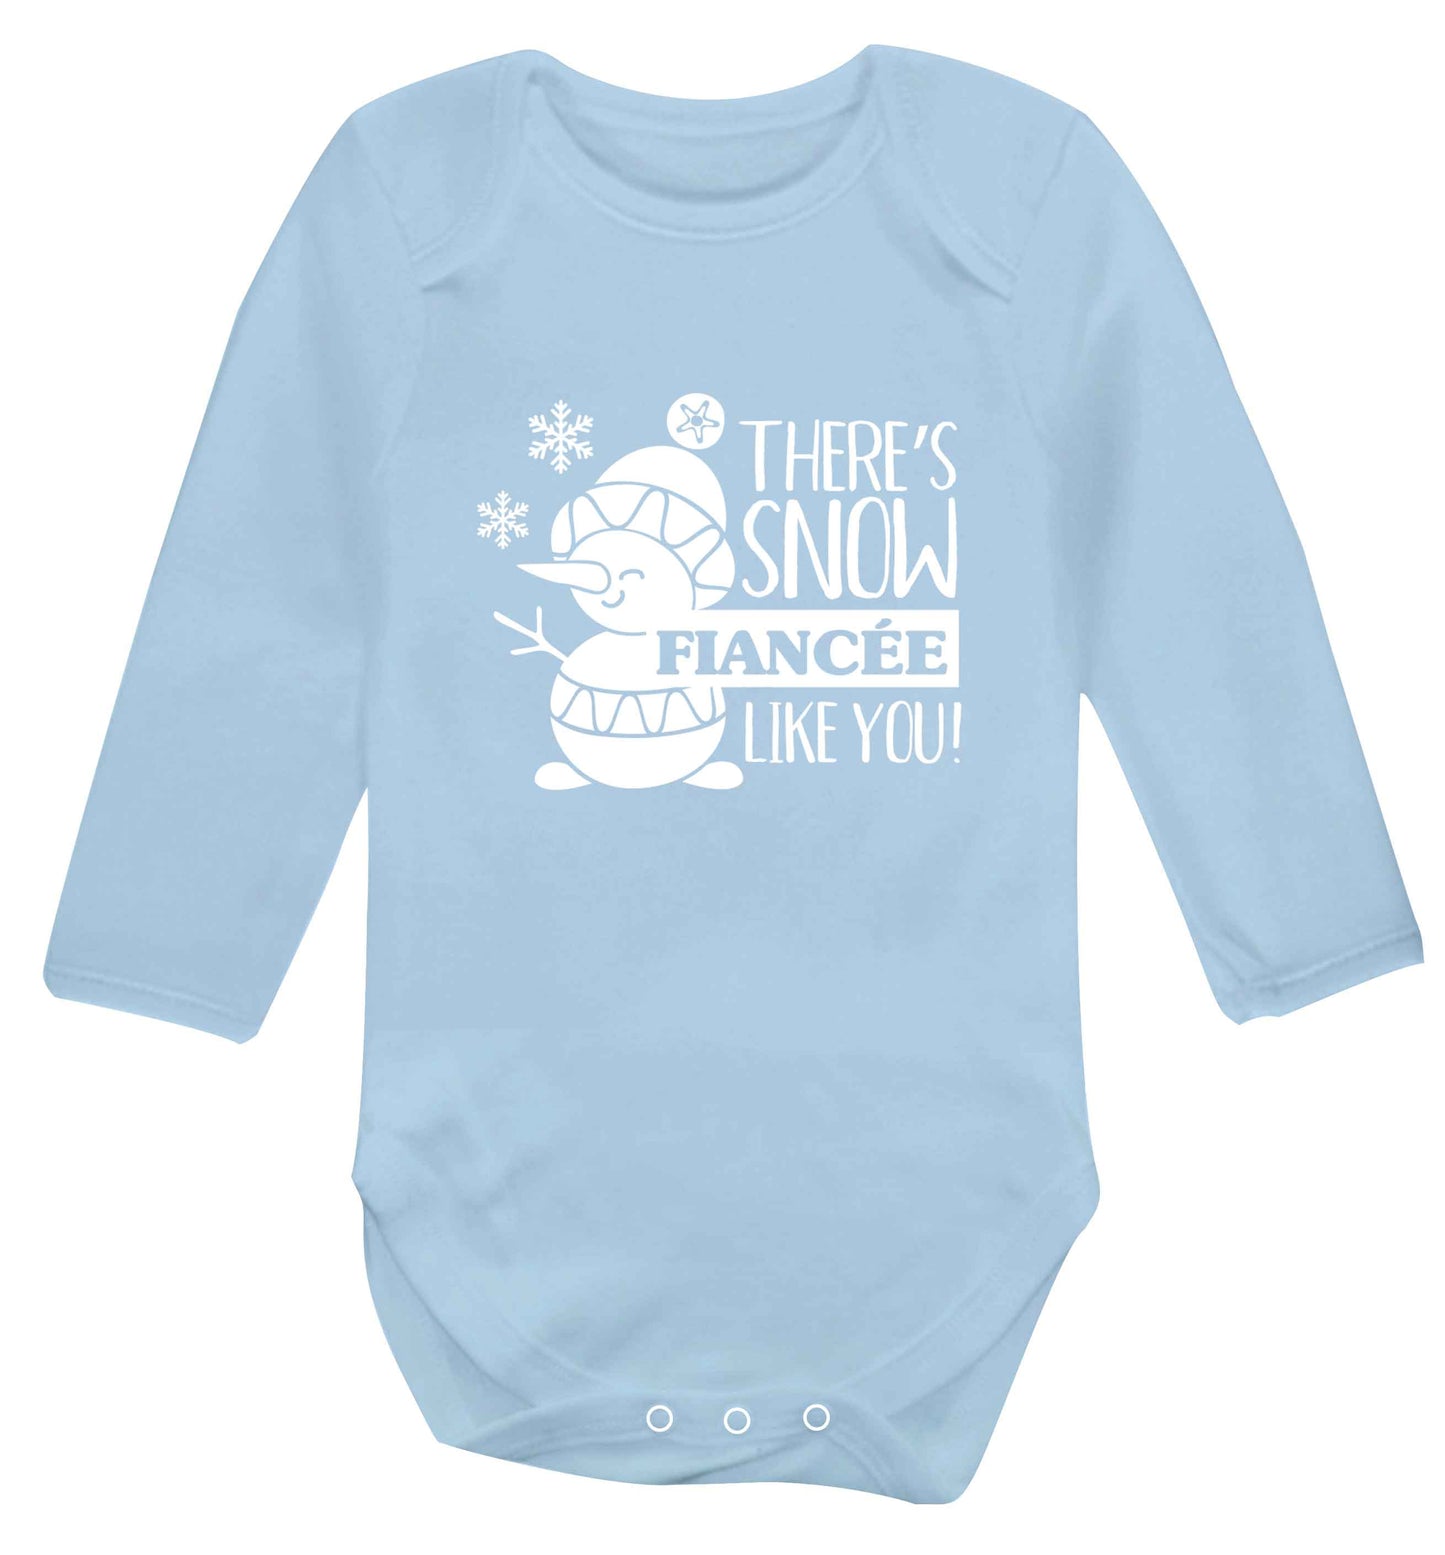 There's snow fiancee like you baby vest long sleeved pale blue 6-12 months